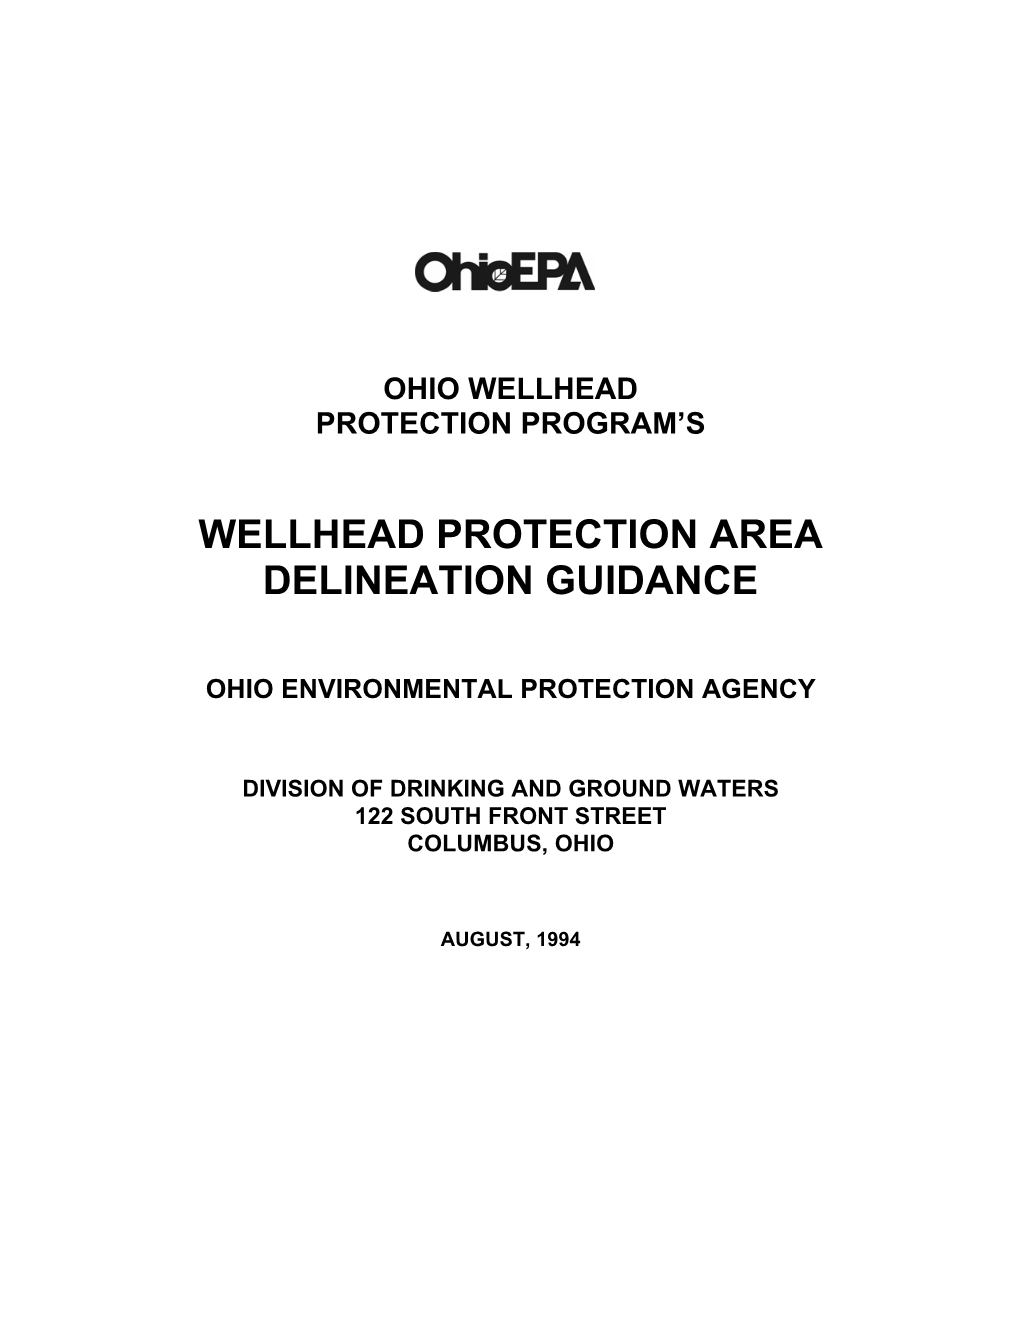 Wellhead Protection Area Delineation Guidance